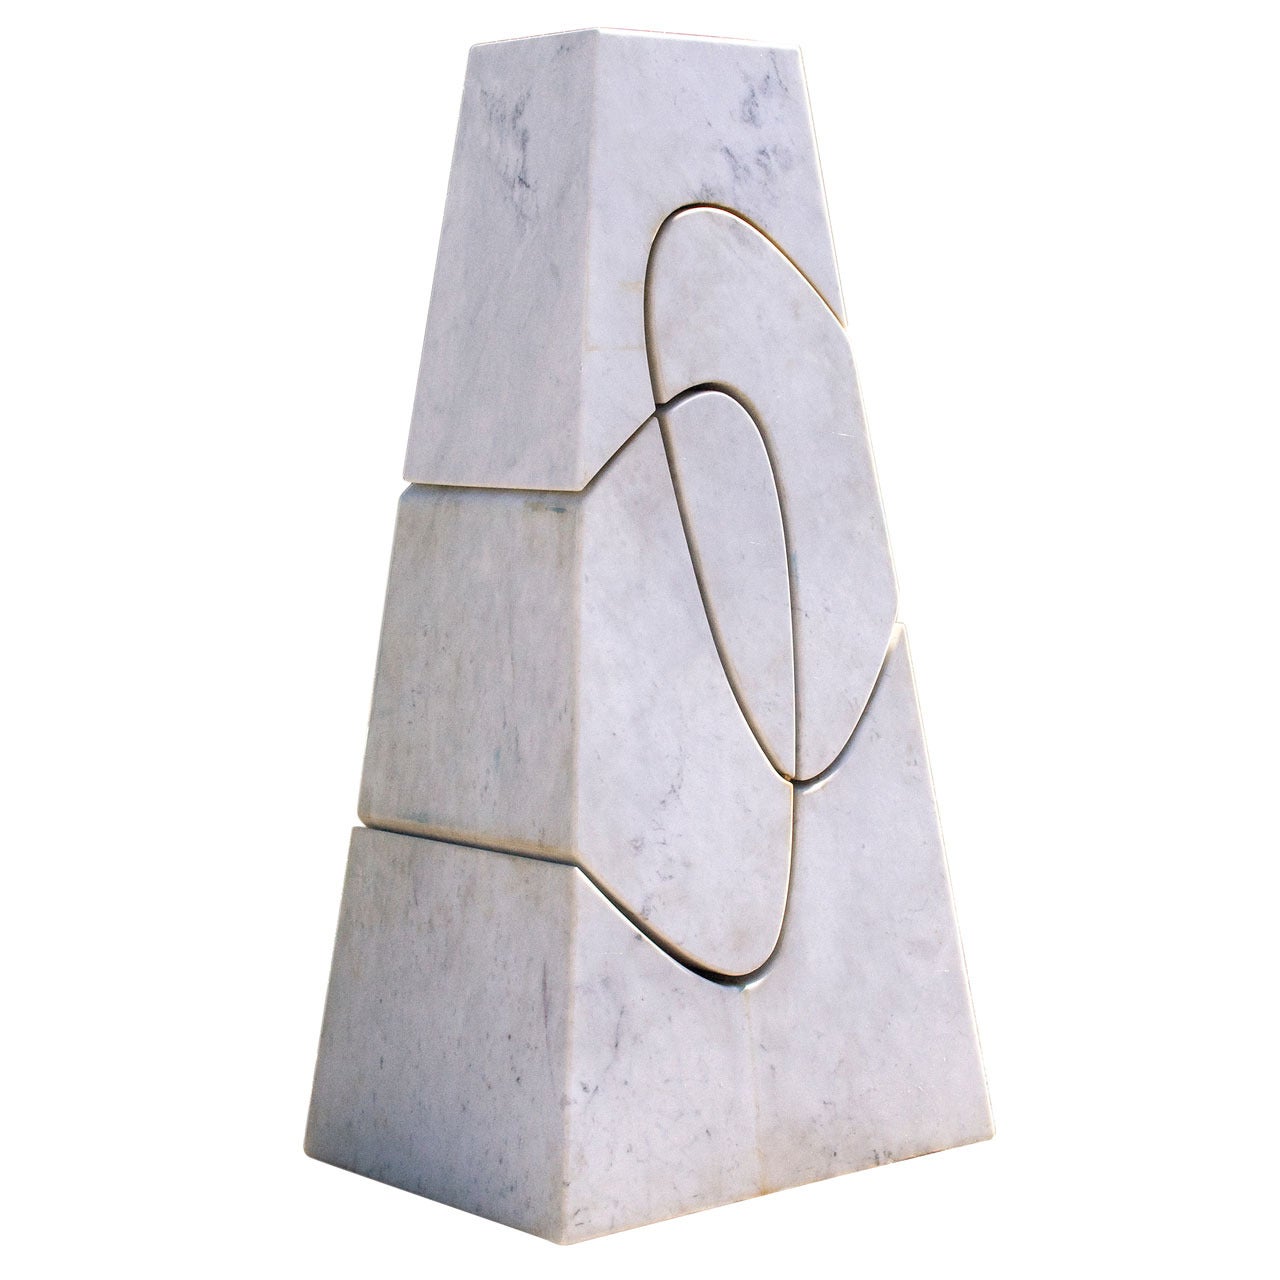 Exceptional Sculpture "Monumental Cambiamiento" by Angelo Mangiarotti, 2006 For Sale